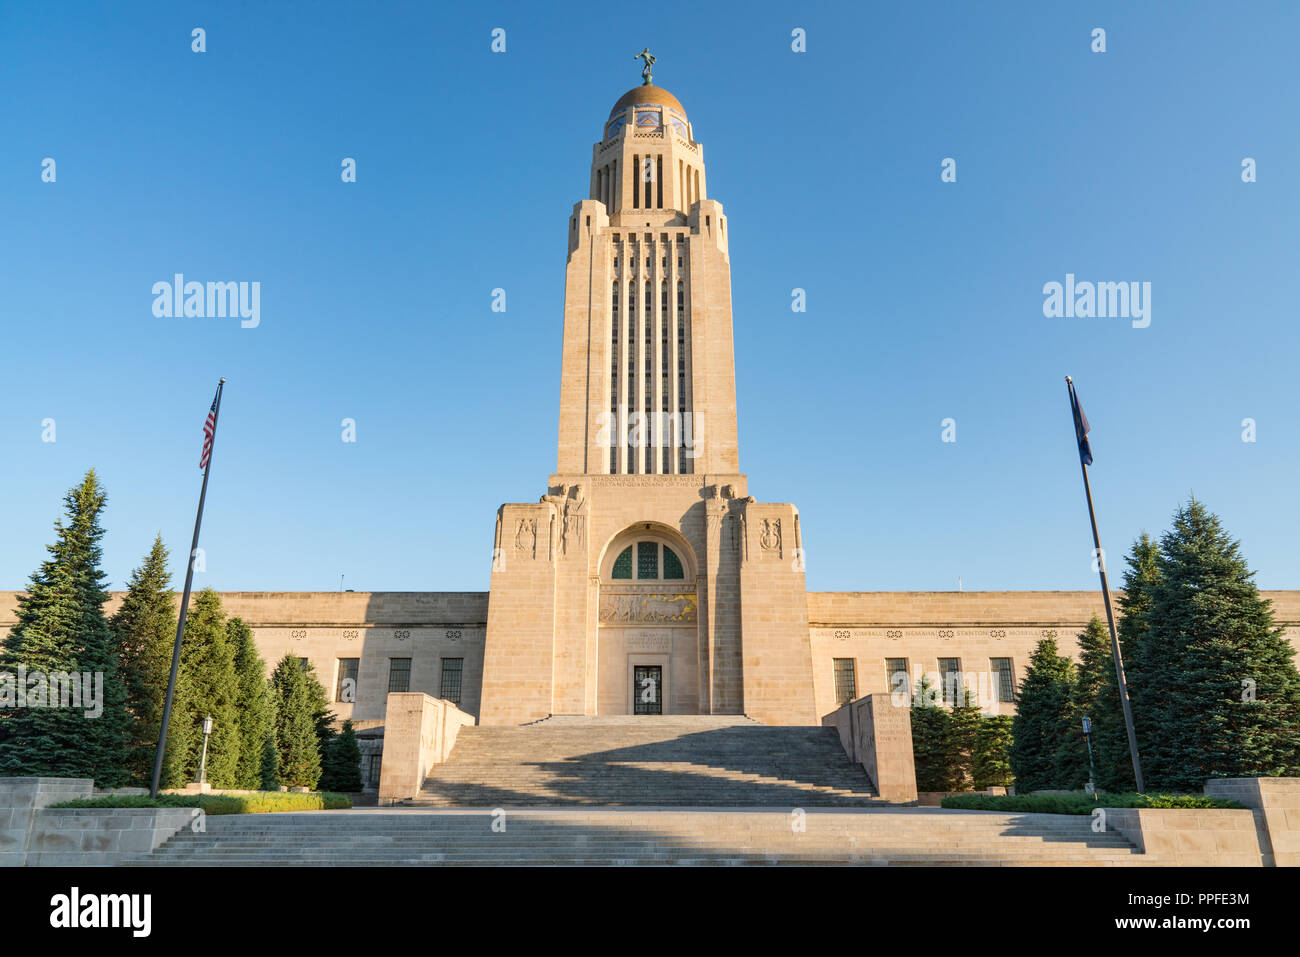 Exterior of the Nebraska Capitol Building in Lincoln against a blue sky Stock Photo